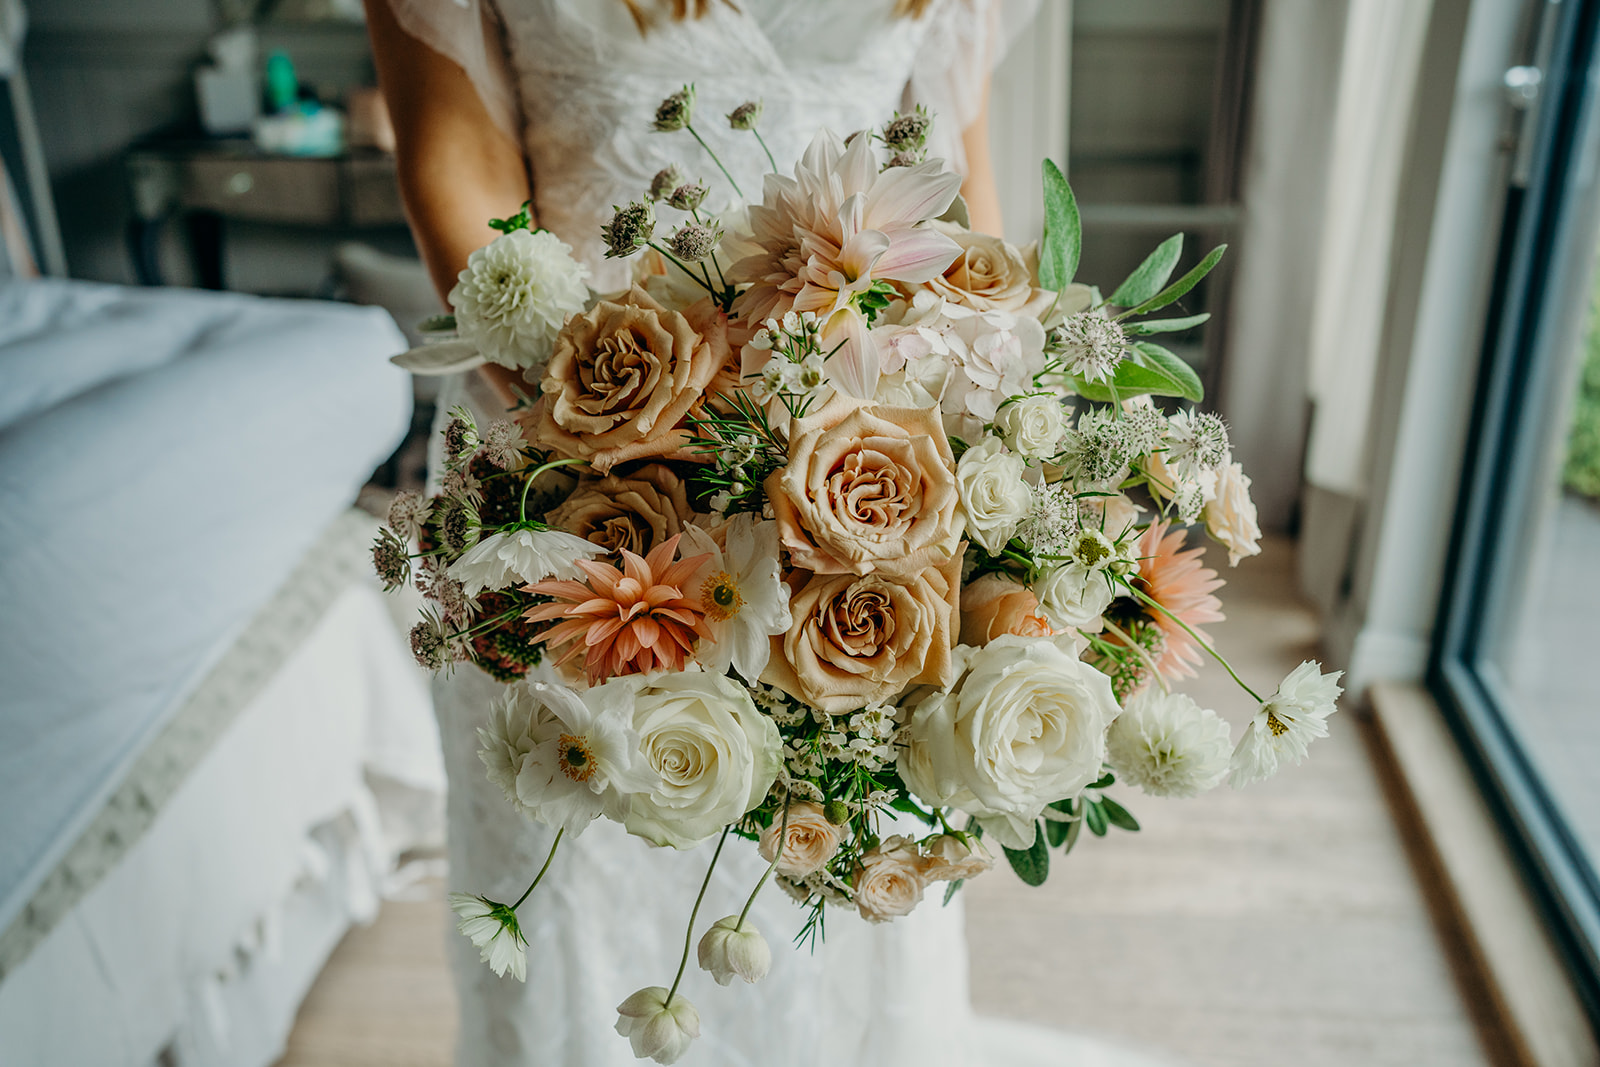 mid section close up of a bride holding a large bridal bouquet with caramel roses, white dahlias and cosmos in nude and blush colours